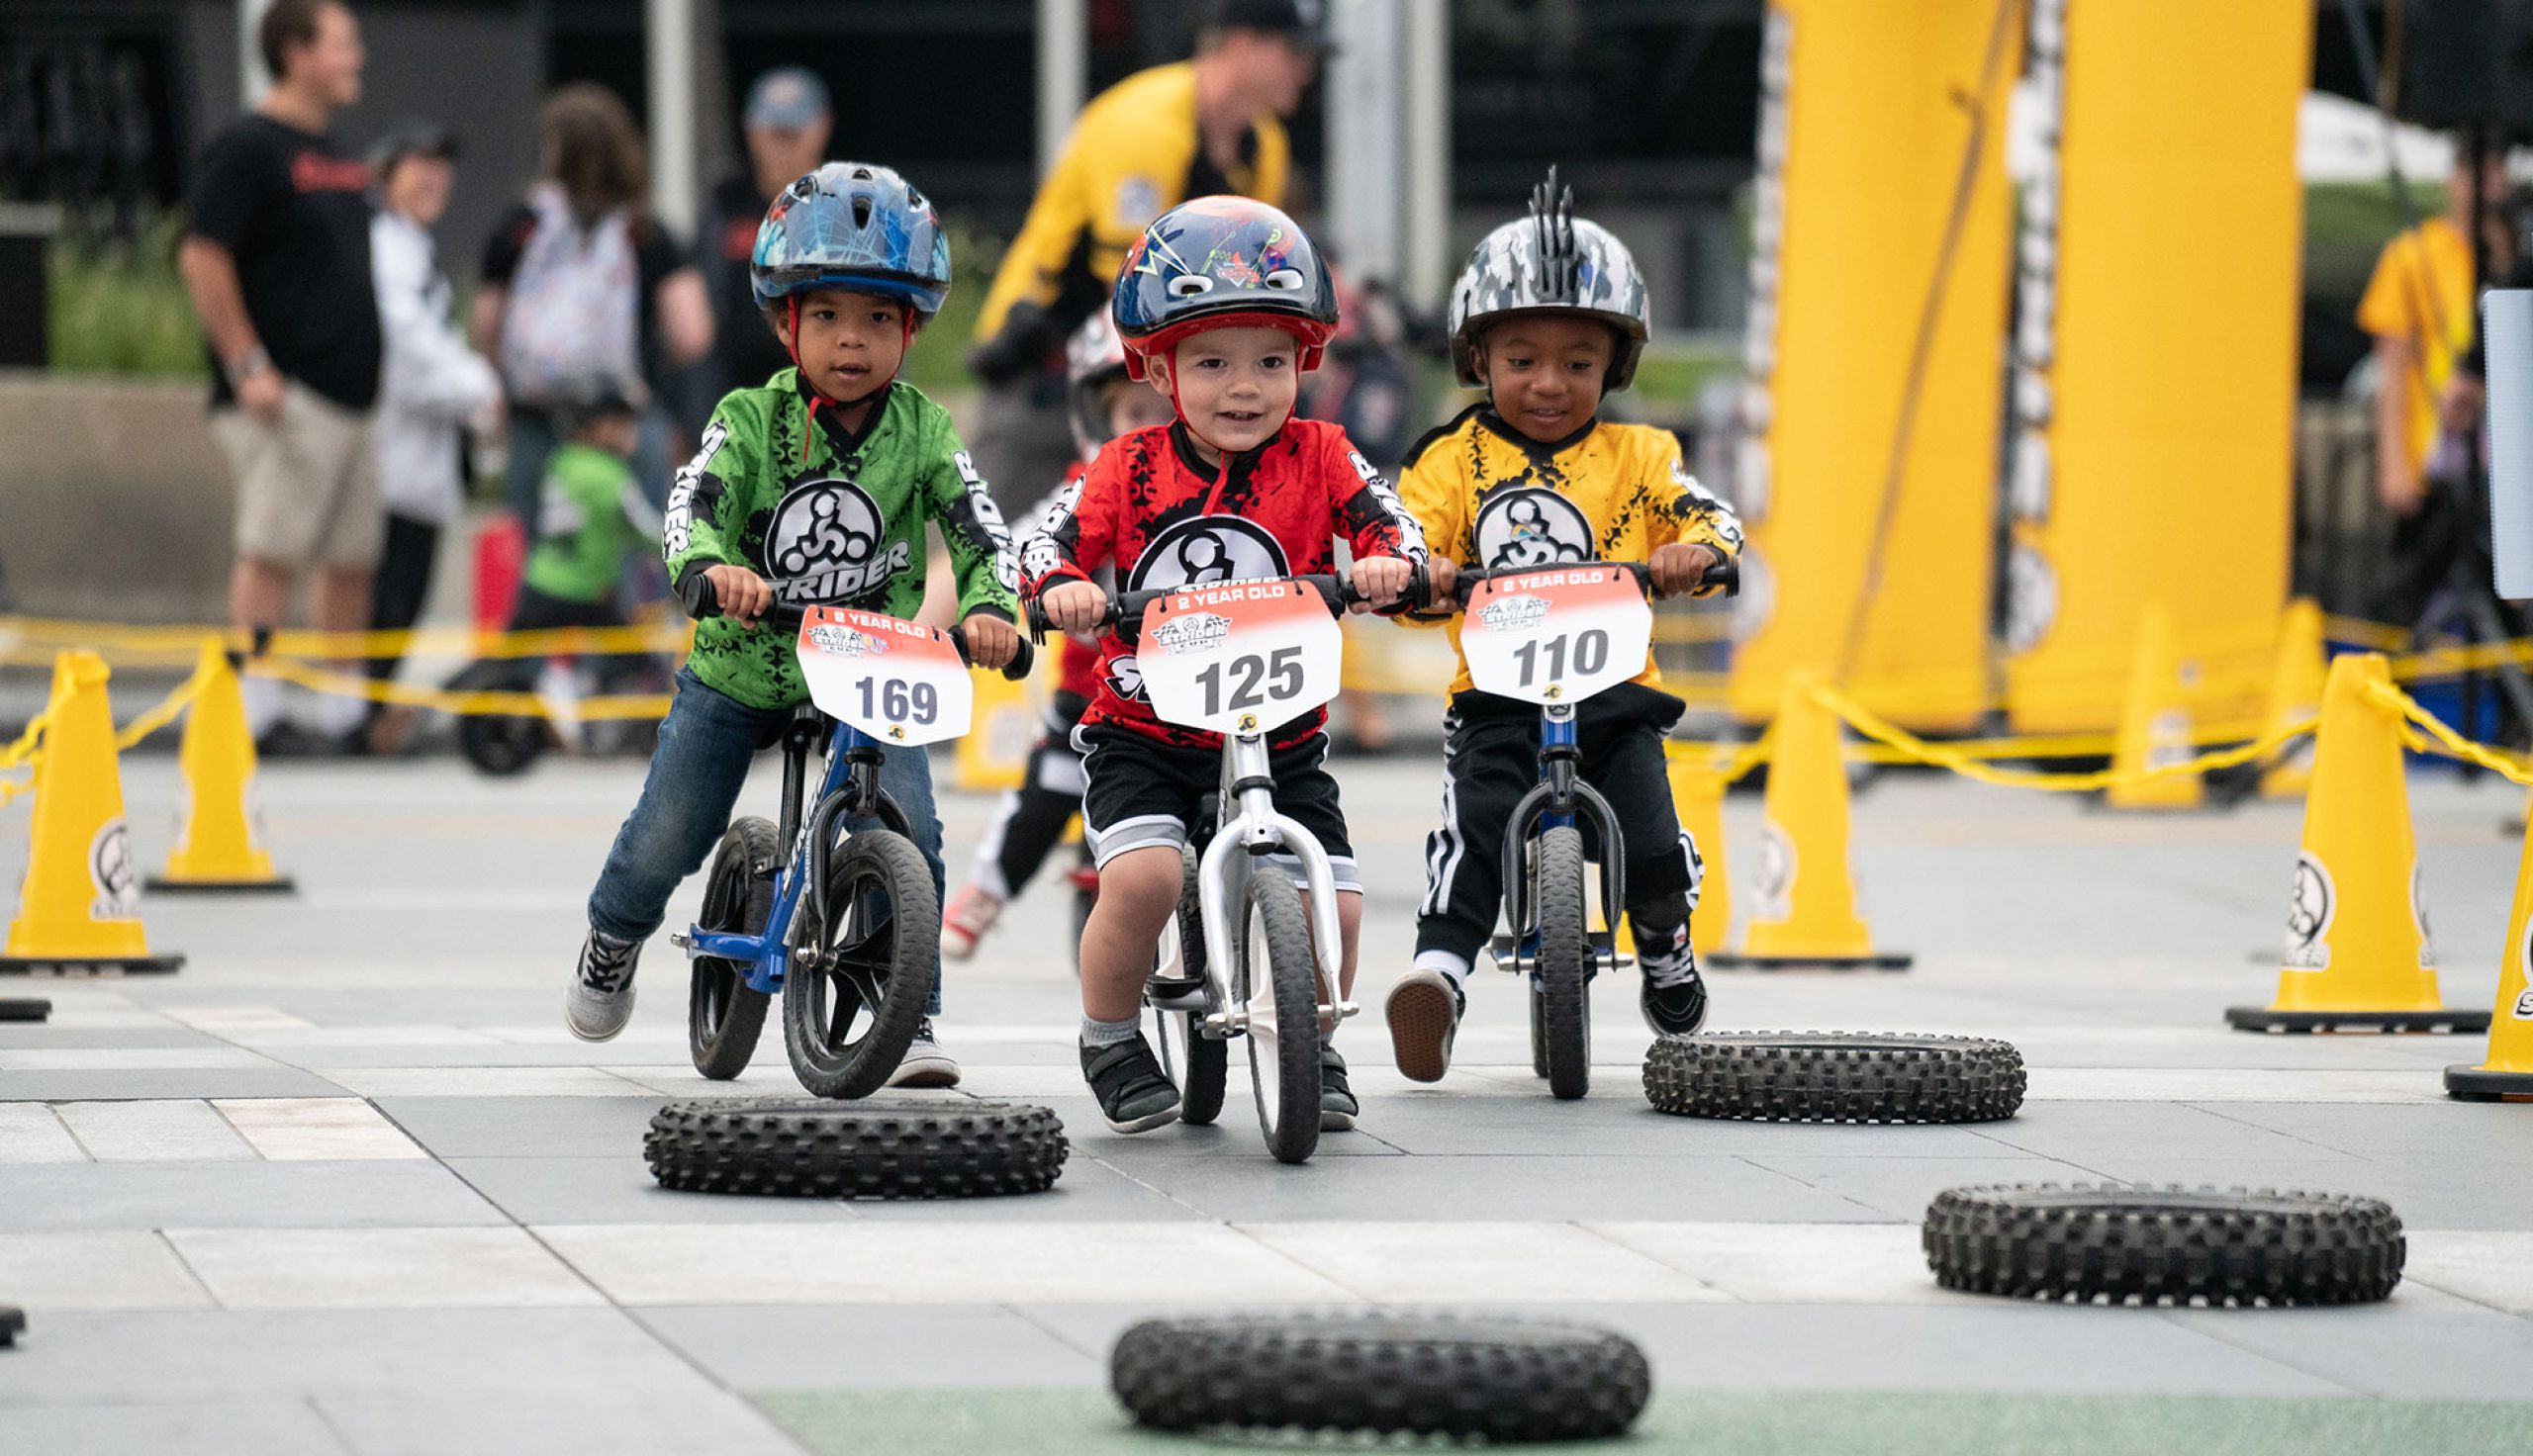 Toddlers racing  over tire obstacles in Strider Cup event